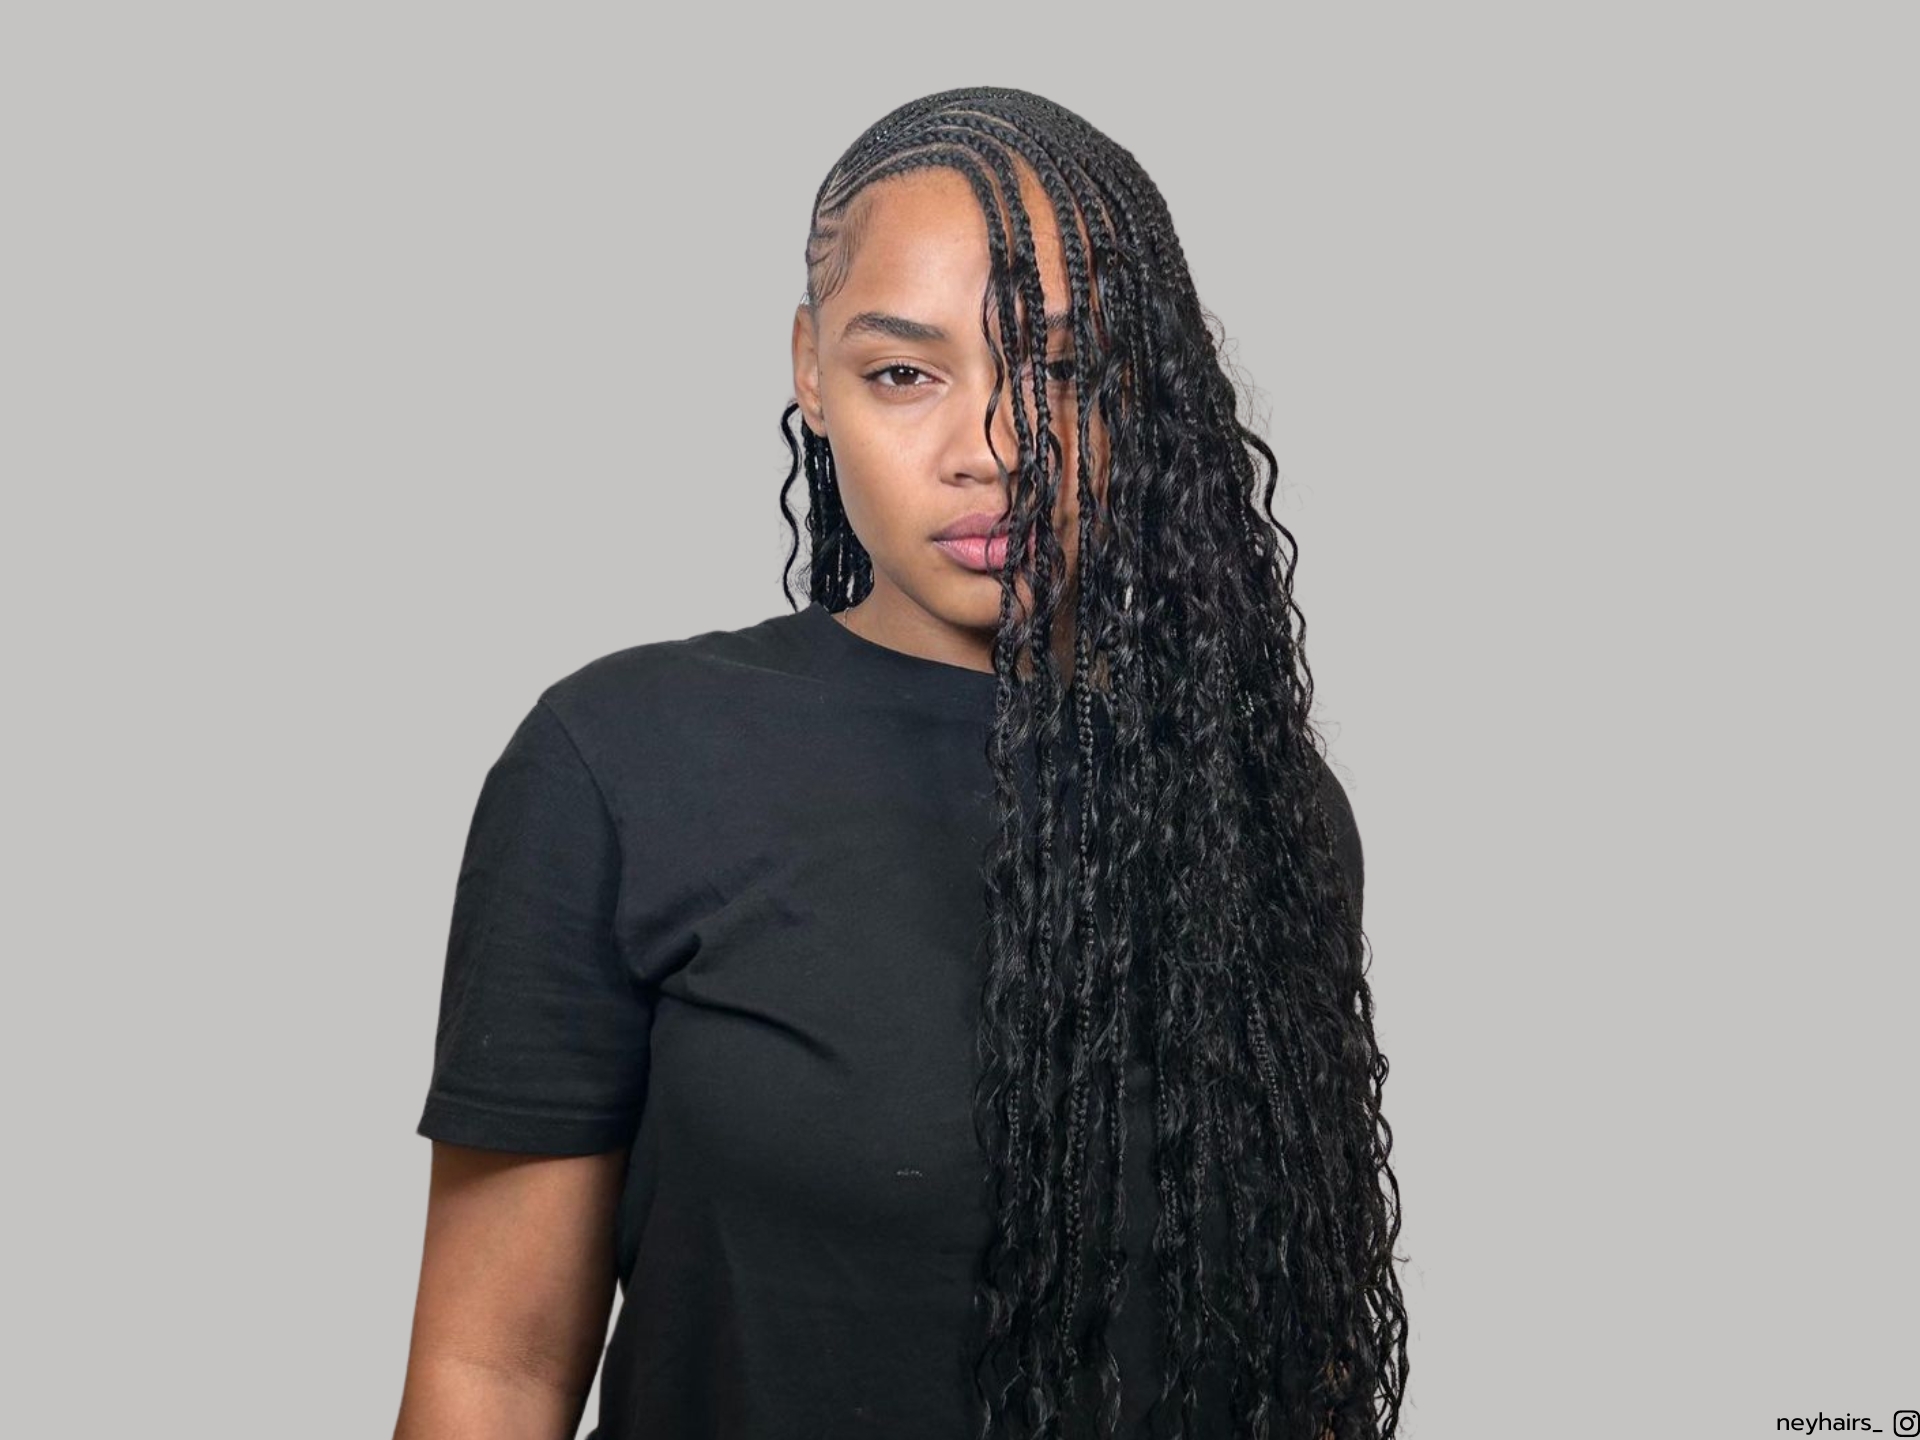 16 Half Cornrows Half Curly Weave Ideas For The Boldest Look